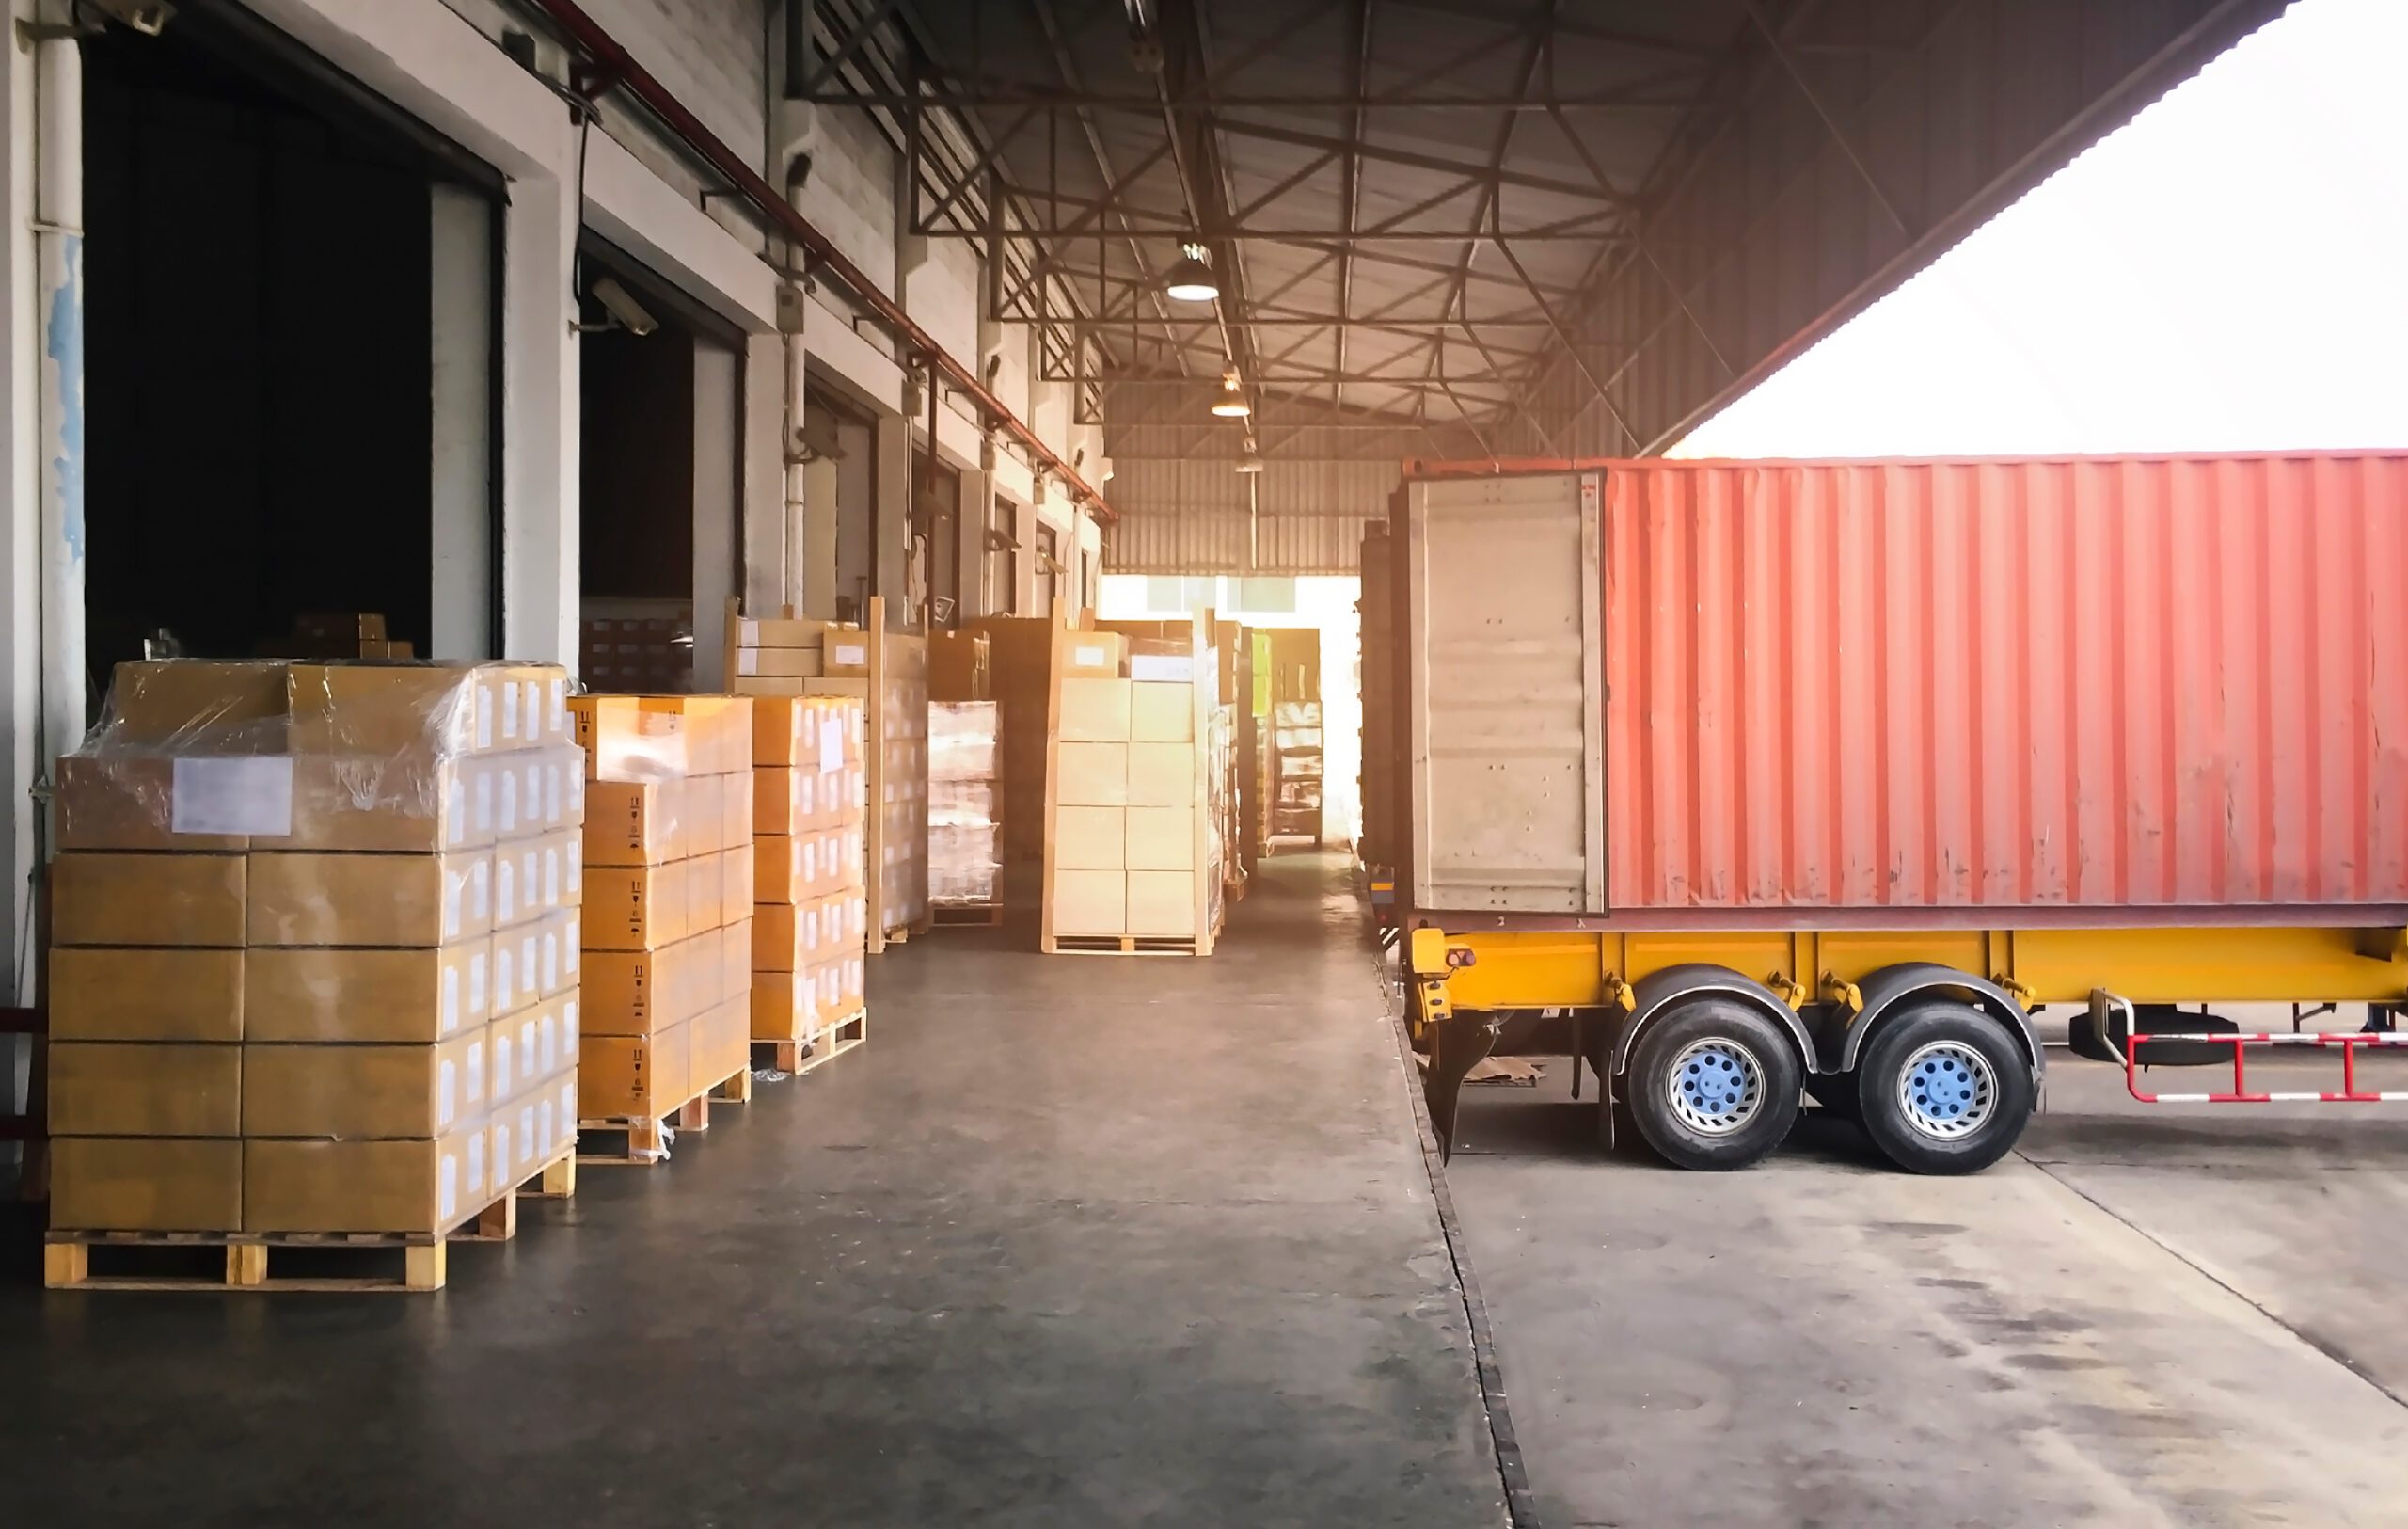 Shipping,Cargo,Container.trailer,Truck,Parked,Loading,Package,Boxes,At,Dock